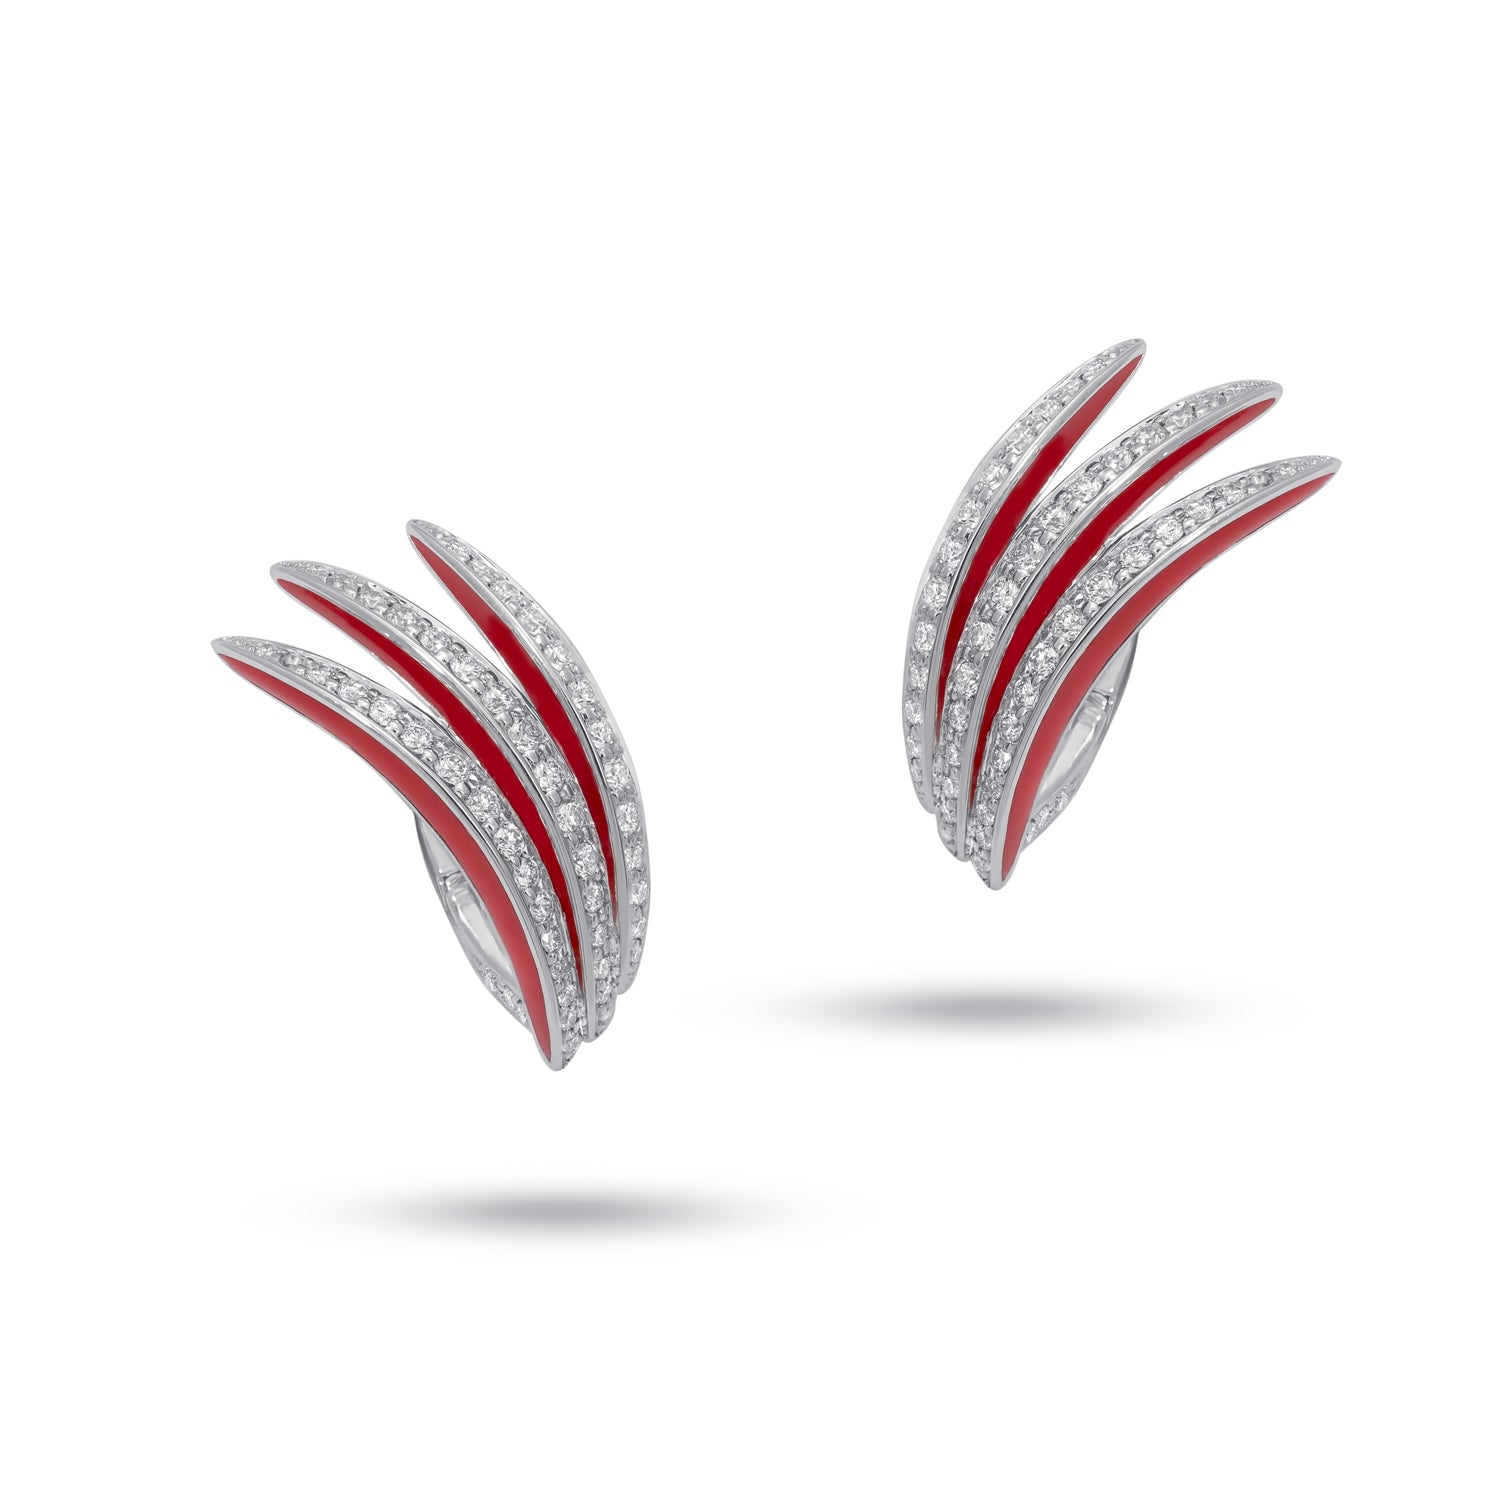 VIVA Classic Earrings with Diamonds and Red Enamel